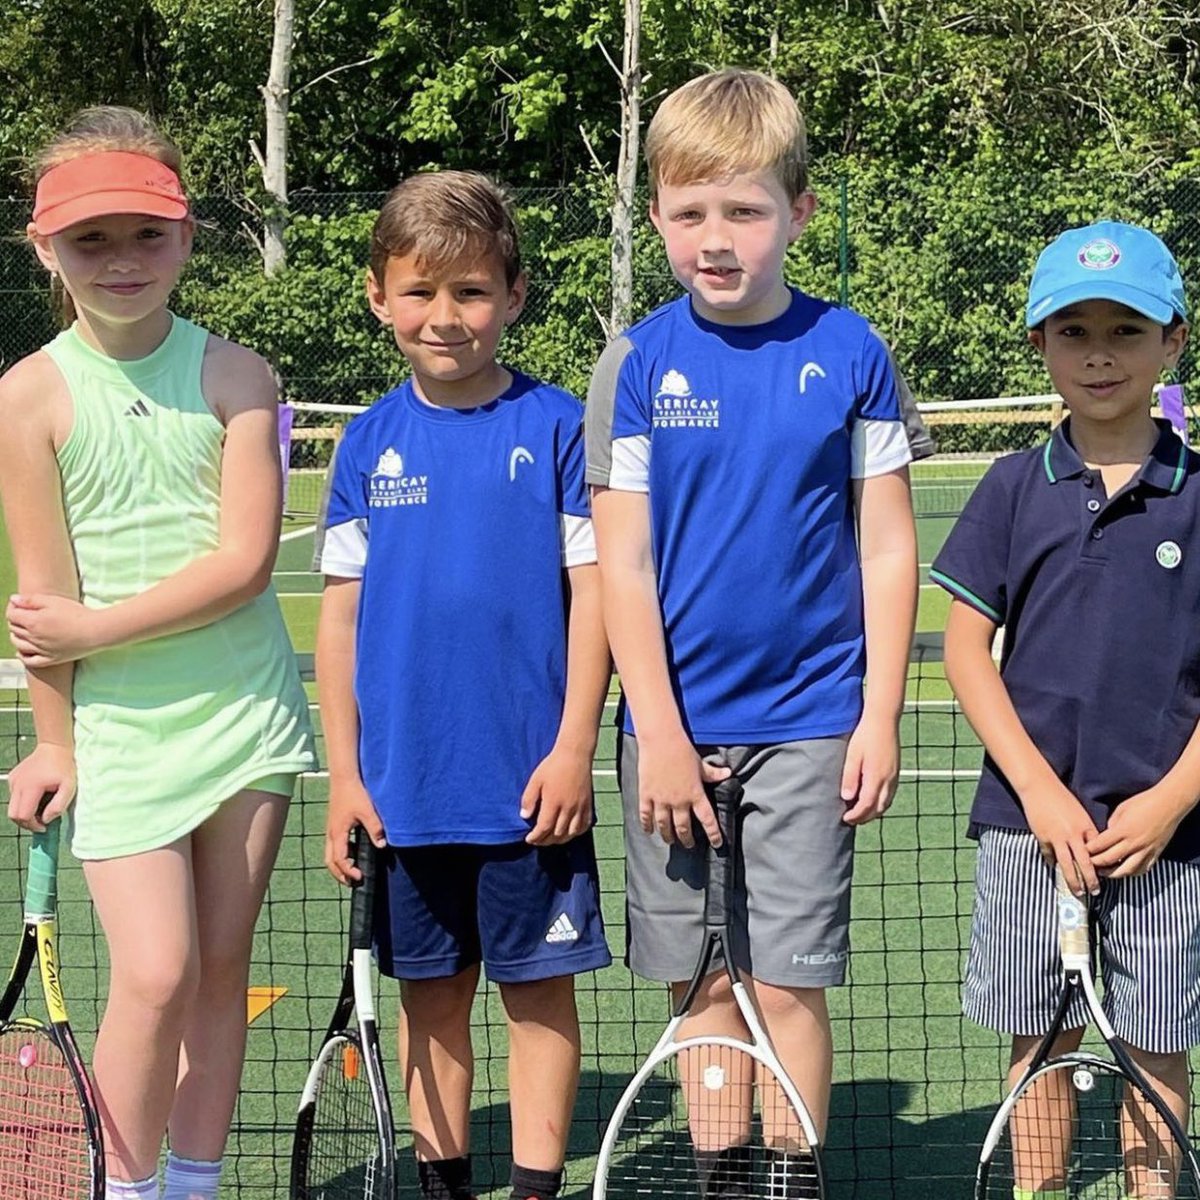 More team matches in the LTA Essex Youth League this weekend, and an overall league victory secured for our 18U girls team 🙌 Well done to Jasmine and Annalise who competed really well on Saturday! Our 8U A and 10U A & B teams were also in action yesterday, all securing wins 👏